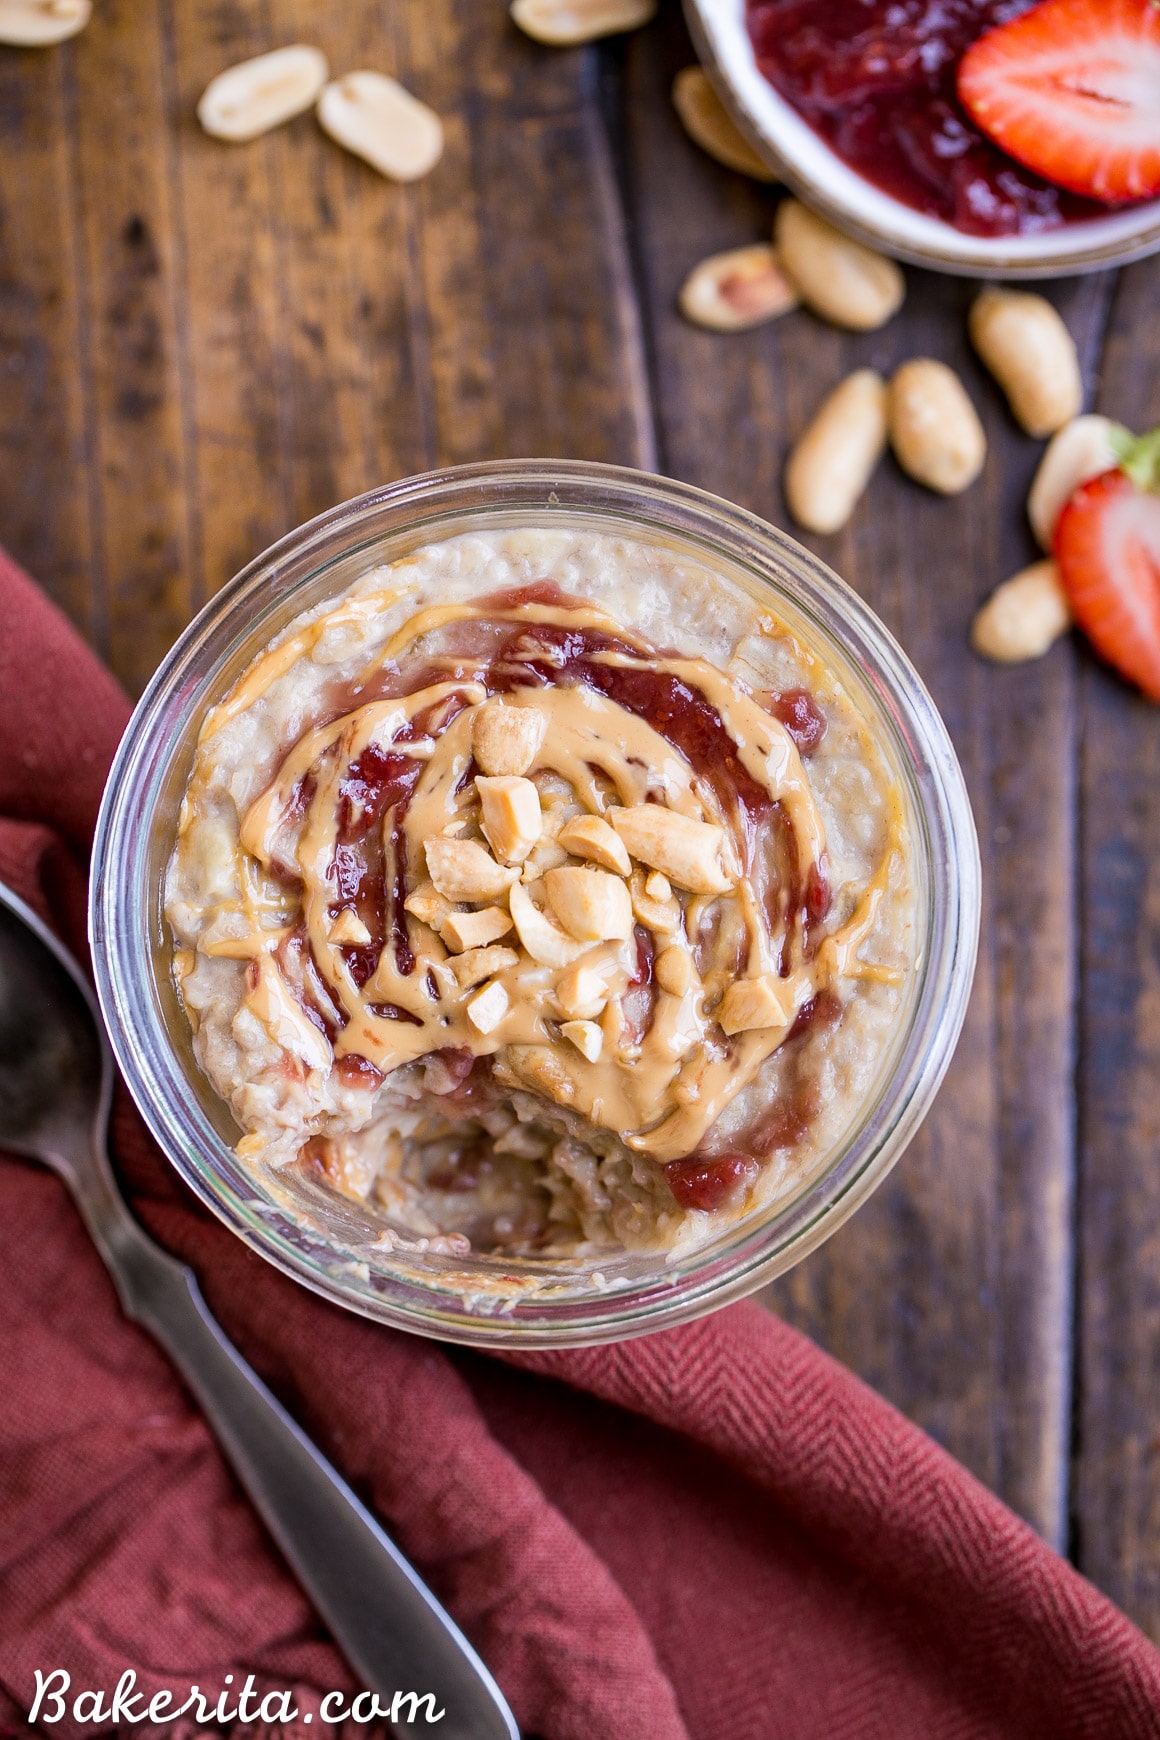 Start your morning with Peanut Butter & Jelly Oatmeal for a healthy & delicious breakfast treat! This gluten-free and vegan oatmeal is sweetened with a ripe banana.